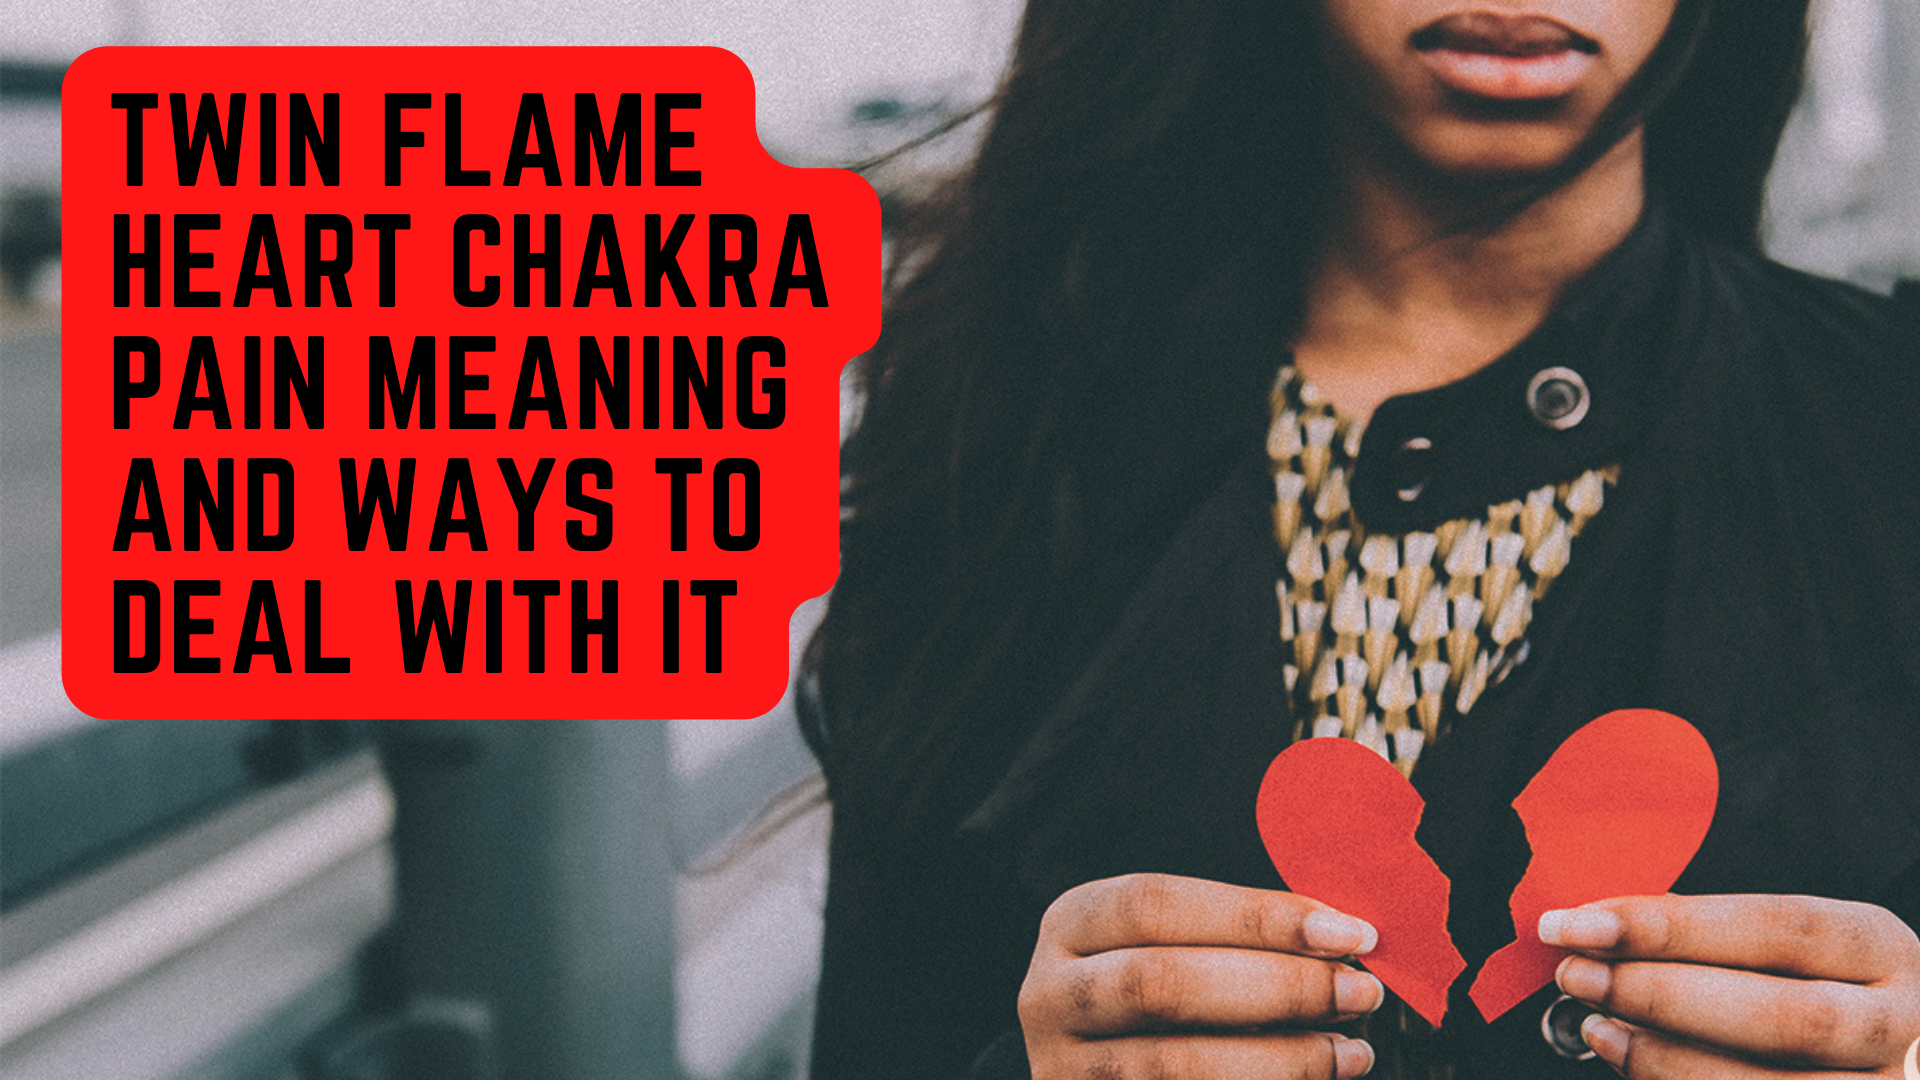 Twin Flame Heart Chakra Pain Meaning And Ways To Deal With It 